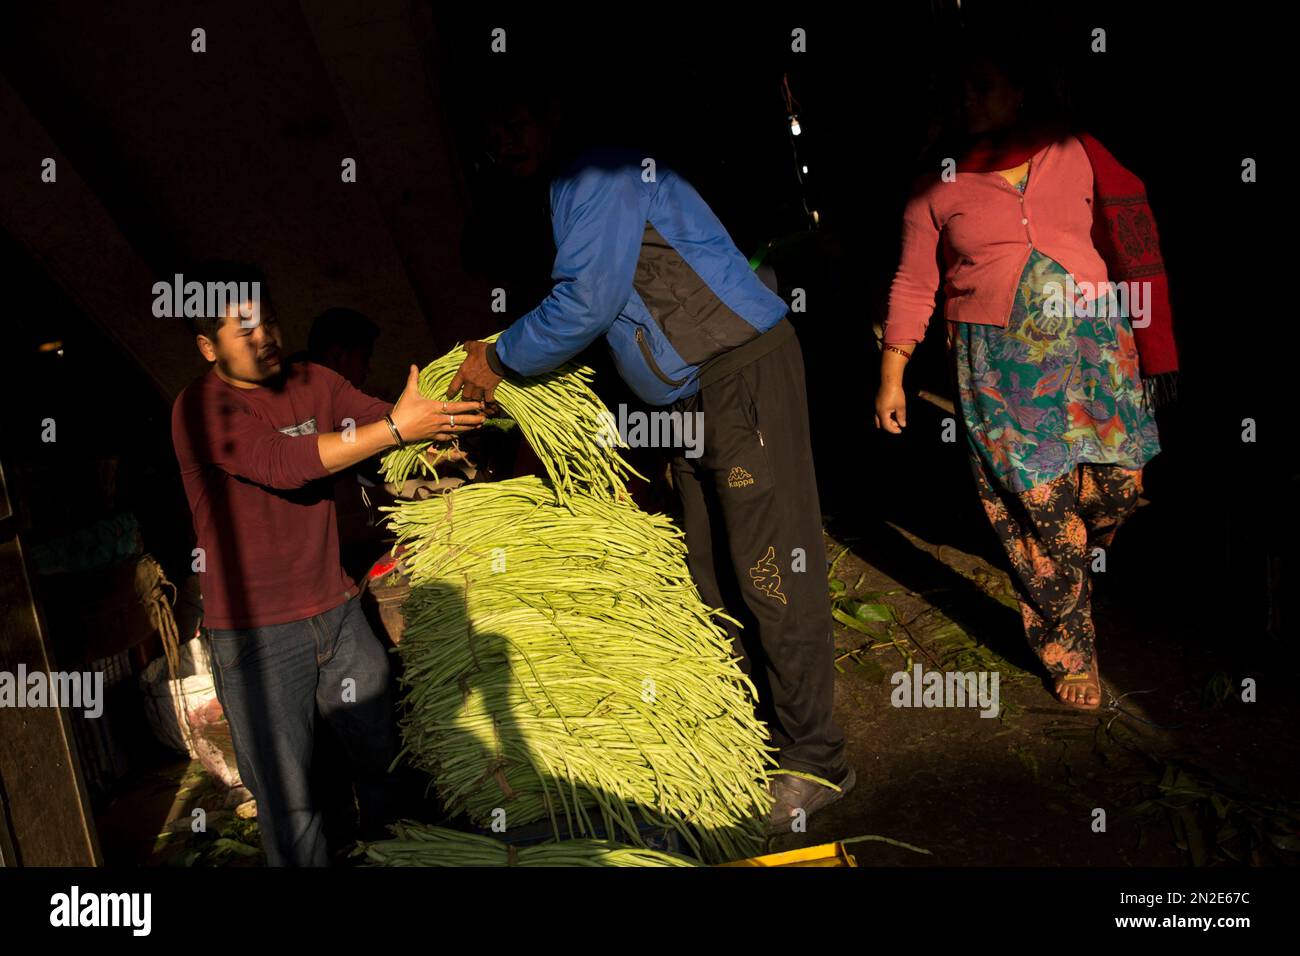 Nepalese residents buy fresh produce at a vegetable market early morning in  Kathmandu, Nepal, Wednesday, April 29, 2015. While many villages across  Nepal affected by Saturday's earthquake are still waiting for rescue